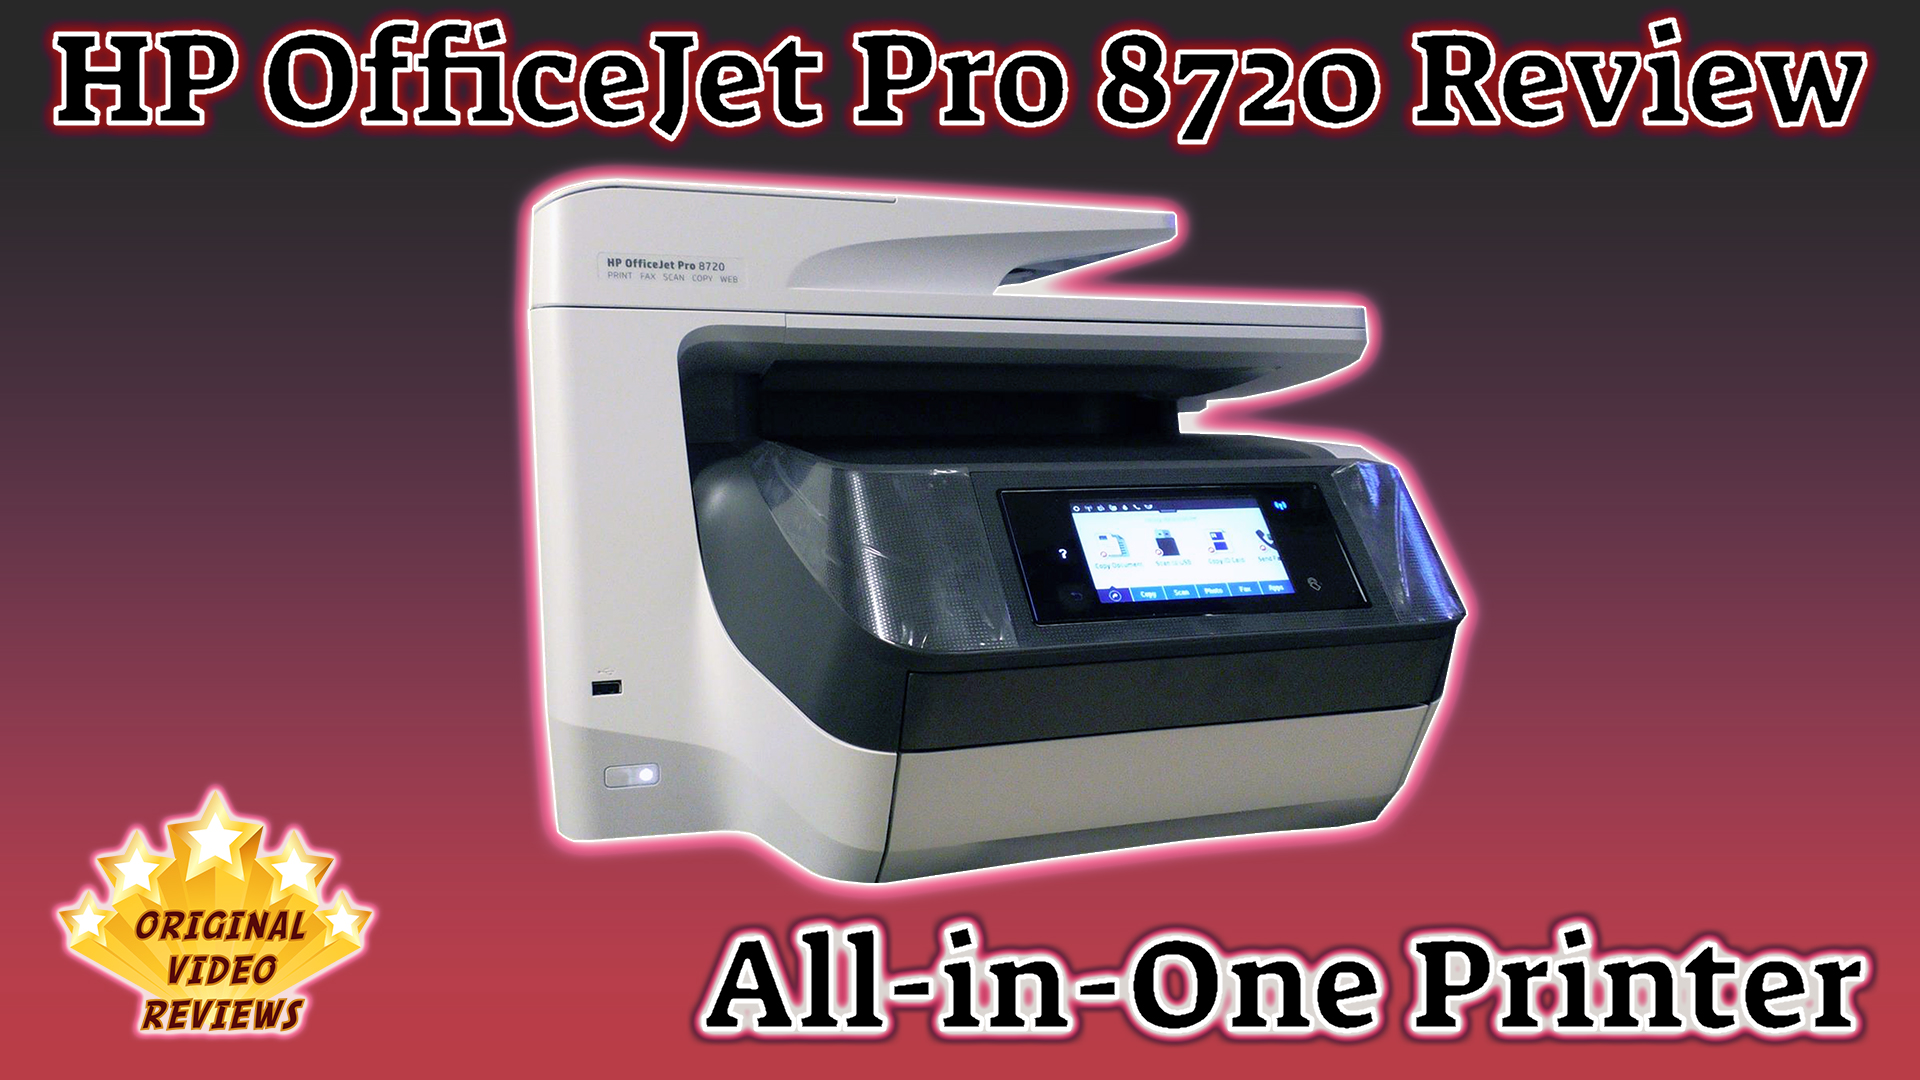 HP OfficeJet Pro 8720 All-in-One Printer Review (Thumbnail)